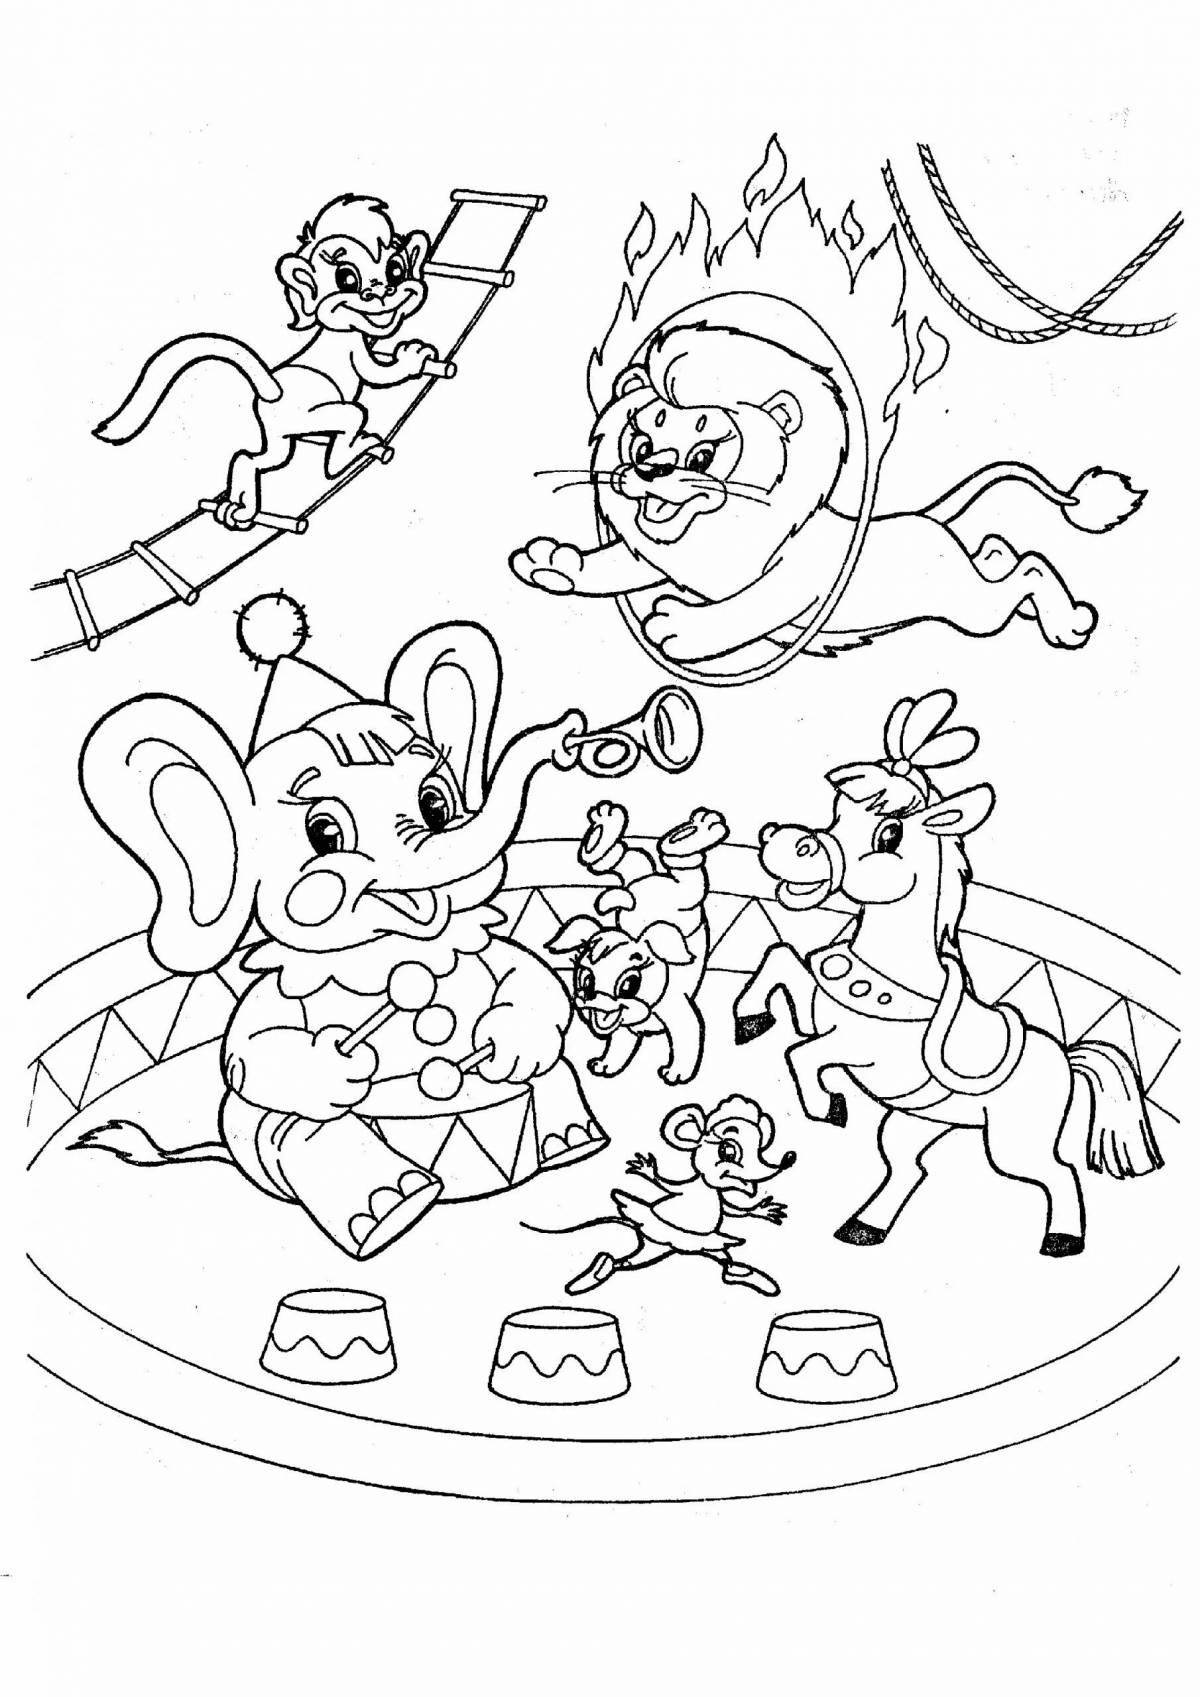 Magic circus coloring book for 6-7 year olds